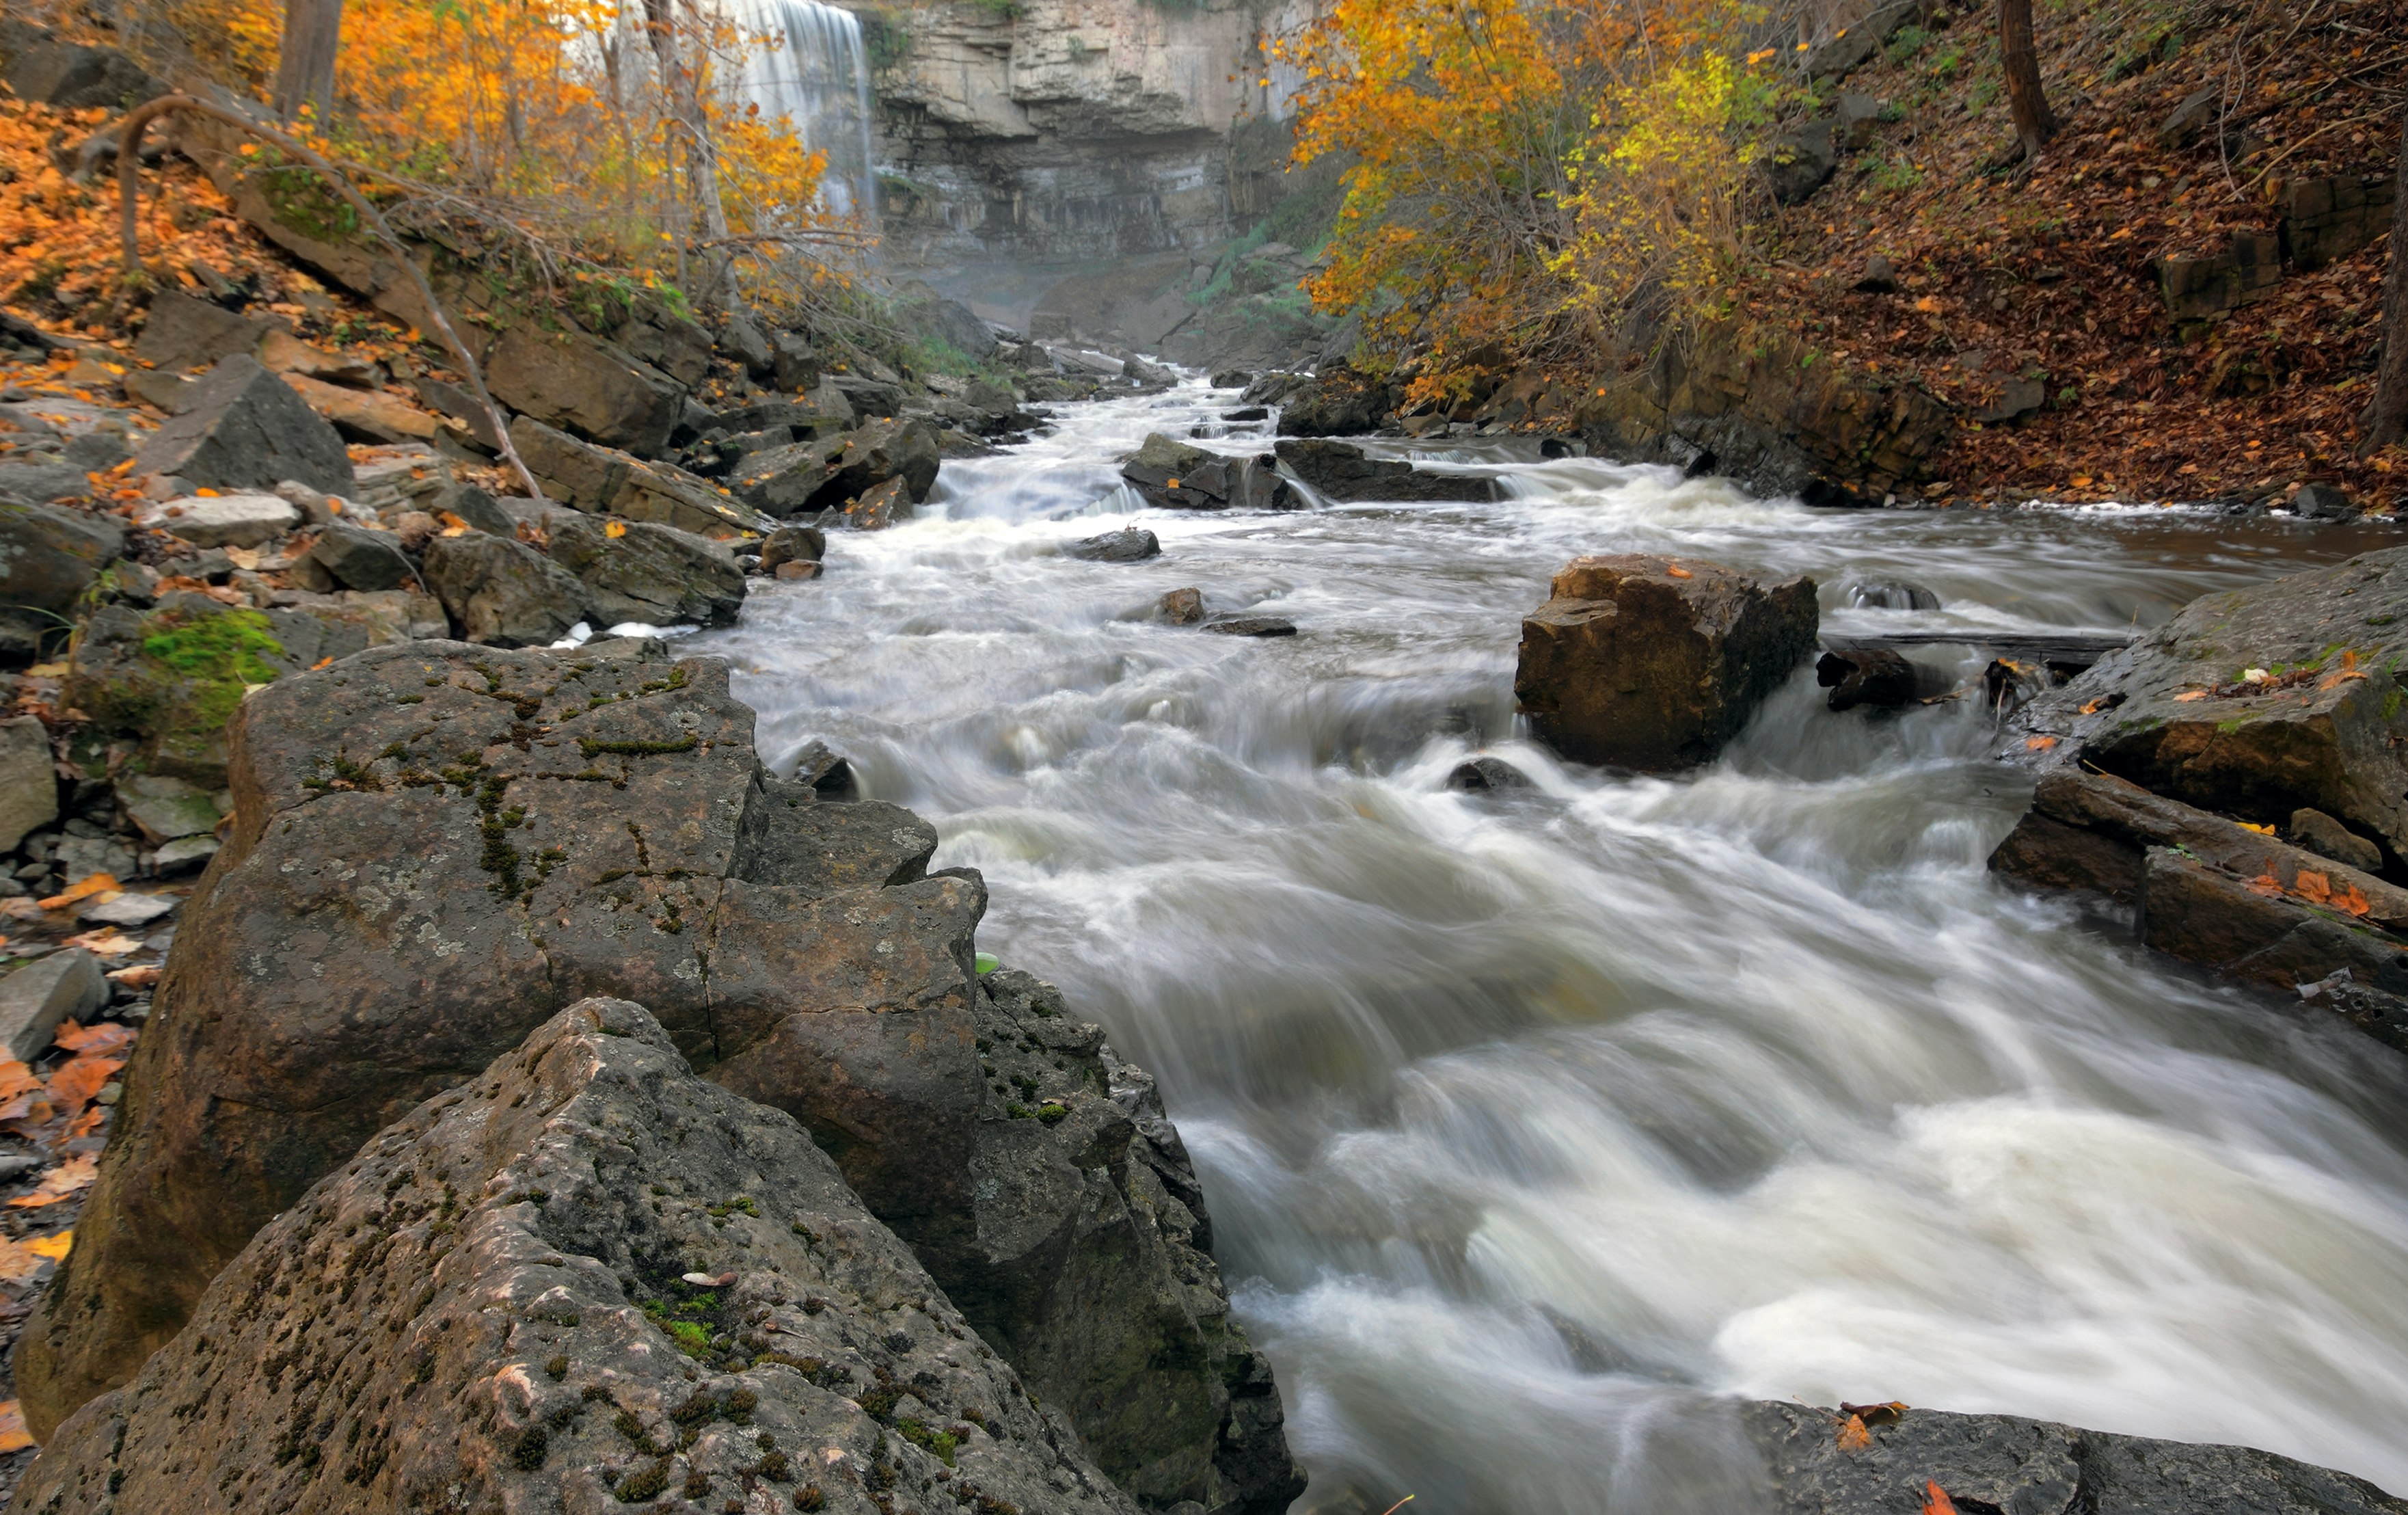 Webster's Falls waterfall runs into a river surrounded by fall foliage in Spencer Gorge Conservation Area, Canada